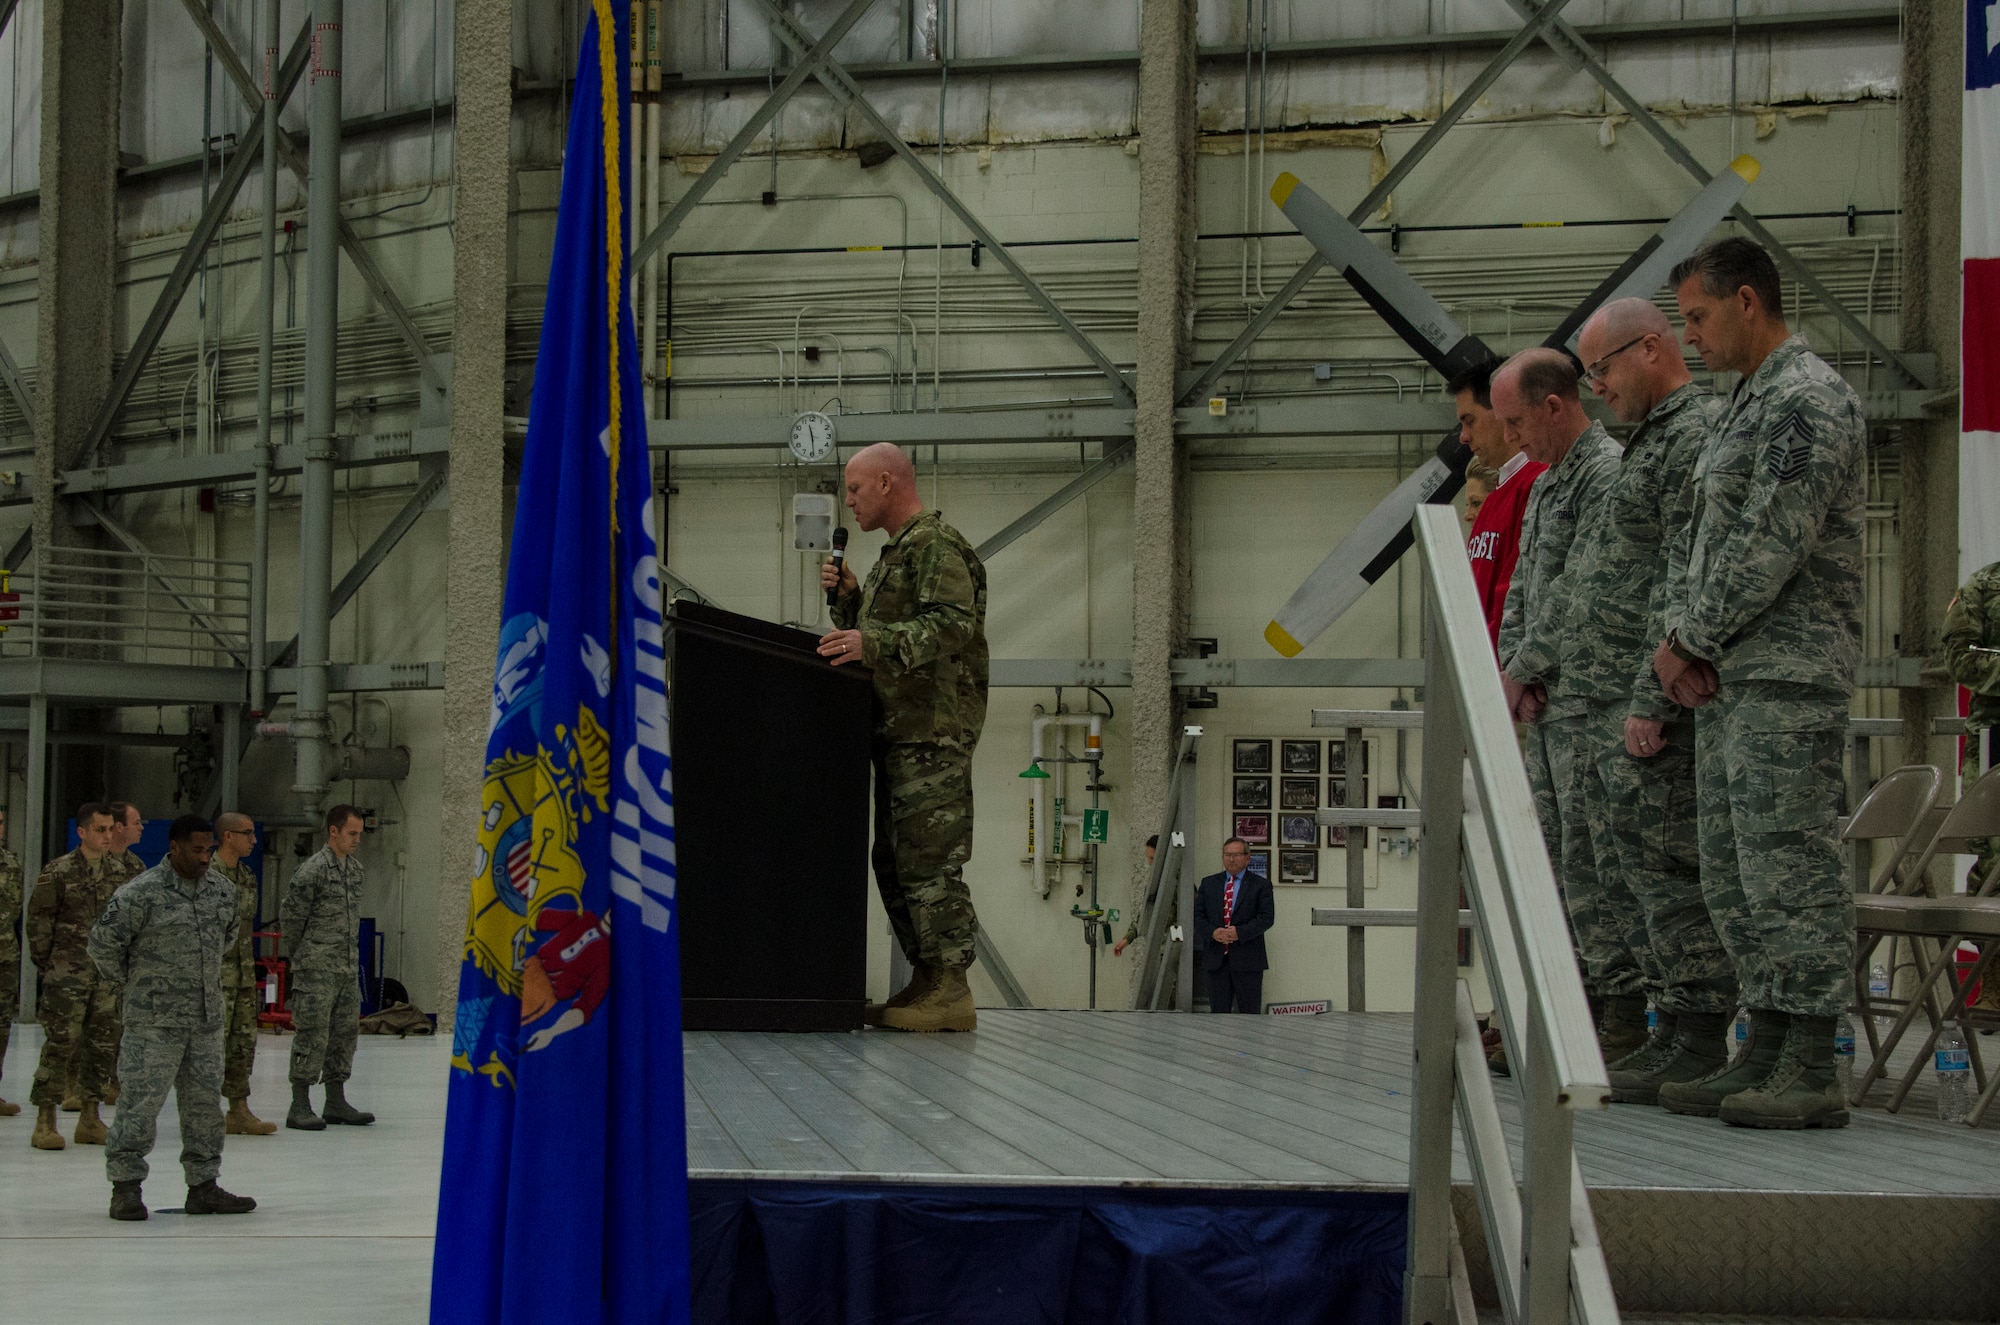 U.S. Air Force Lt. Col. Matthew Friese, wing chaplain of the 128th Air Refueling Wing, Wisconsin Air National Guard, provides the invocation at the beginning of a send-off ceremony at General Mitchell Airfield in Milwaukee, Wisconsin, Dec. 2, 2017.